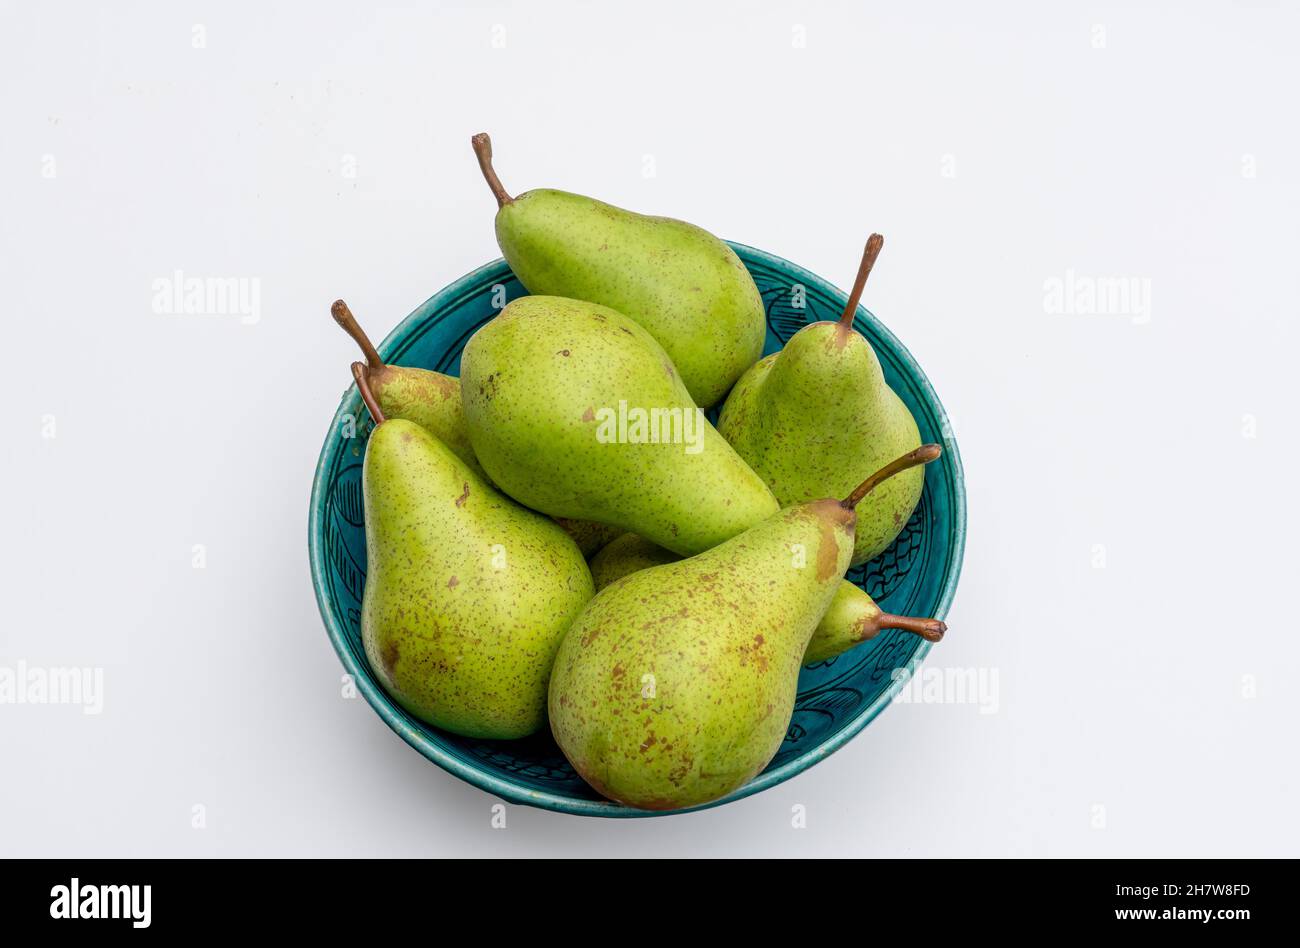 A bunch of ripe jucy pears with stalks in a blue clay bowl on a white background Stock Photo